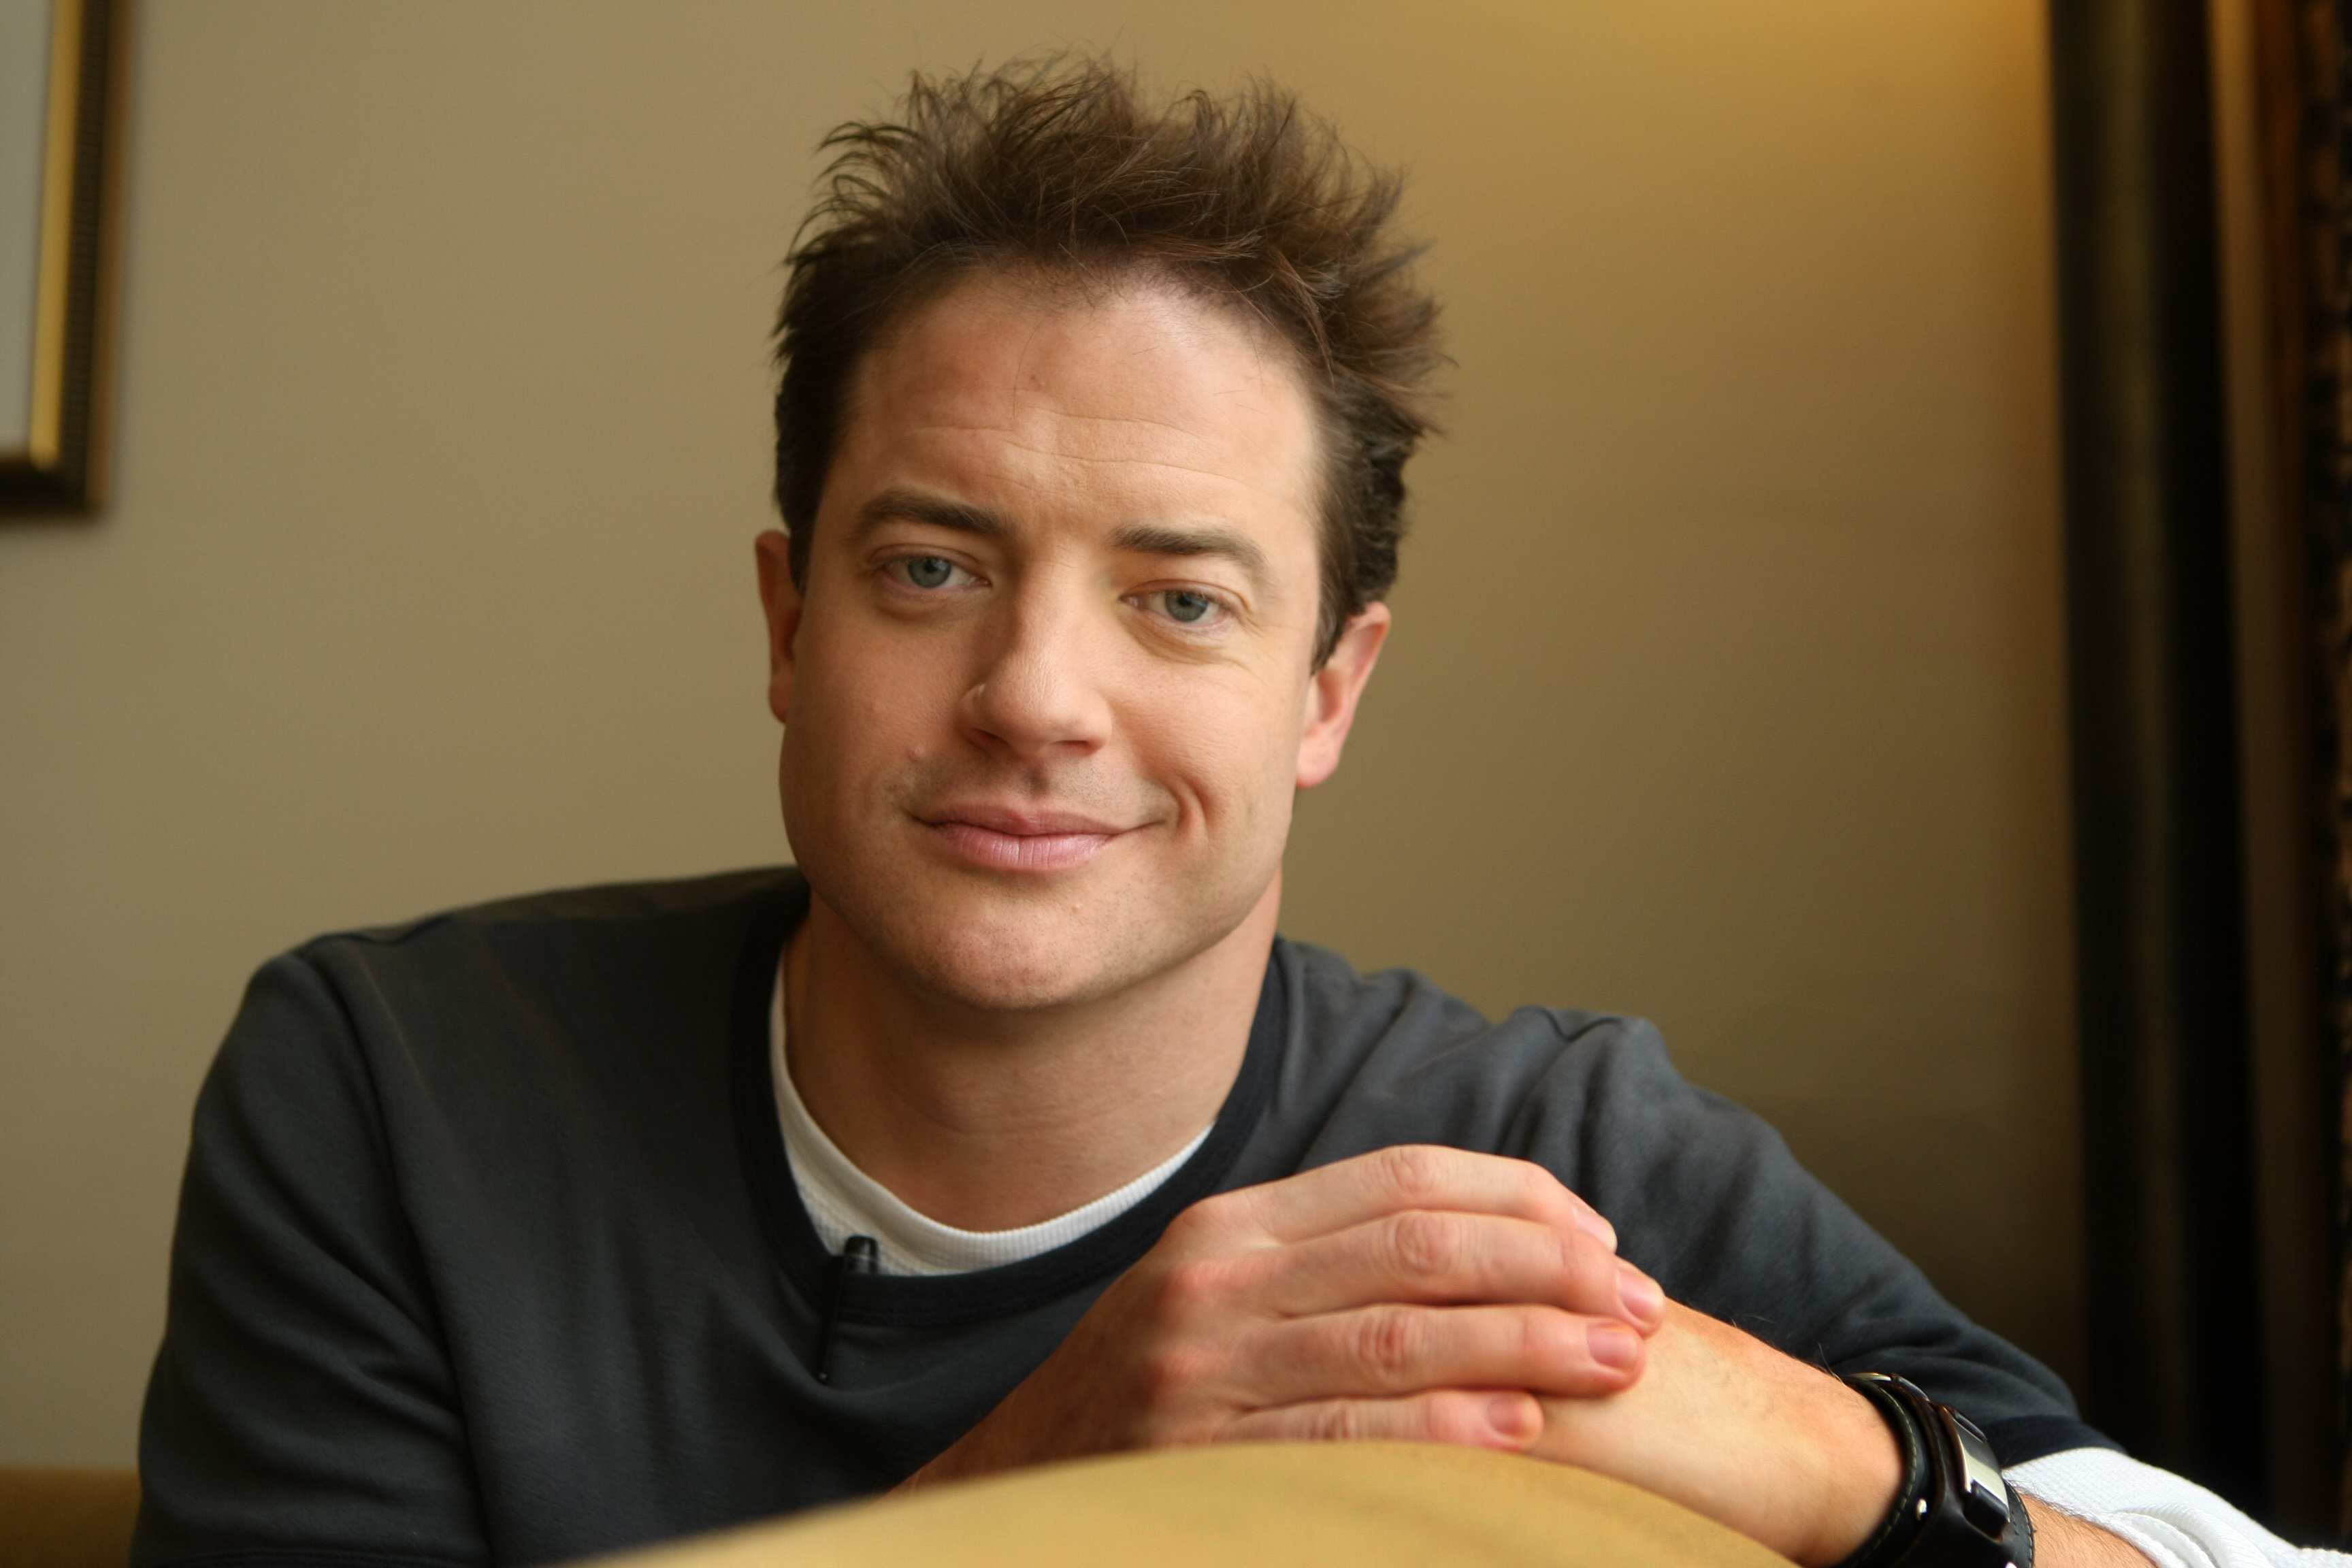 Brendan Fraser as professer Trevor Anderson in the film "Journey to the Center of the Earth" on January 1, 2010 ┃Source: Getty Images